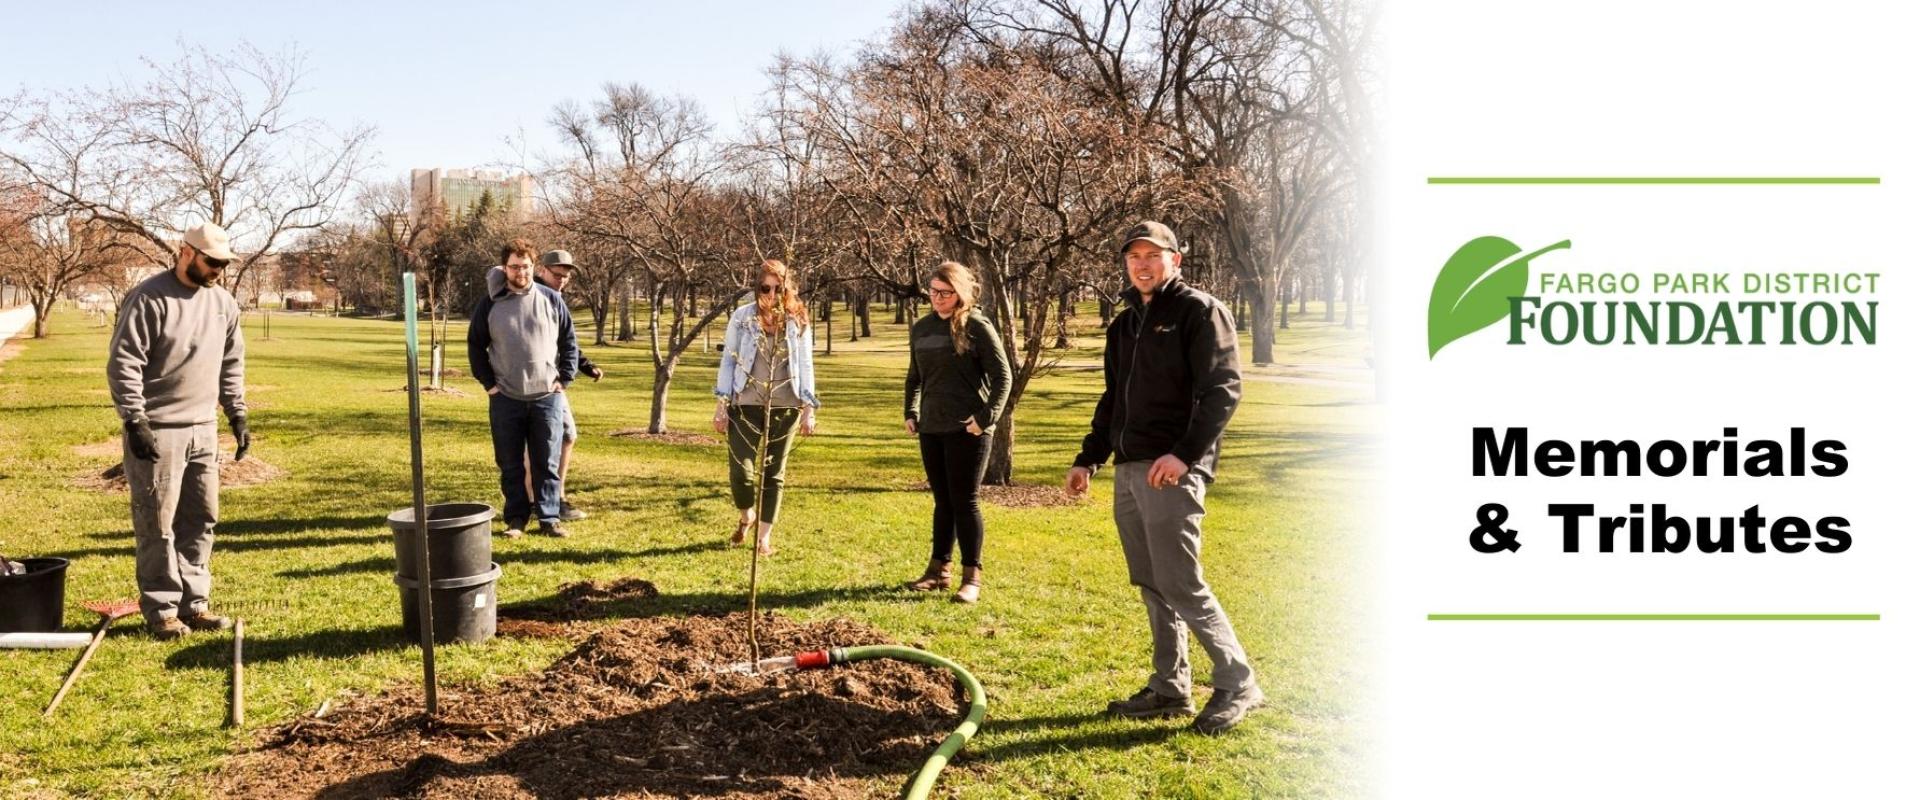 This photo shows a group planting a tree at Island Park